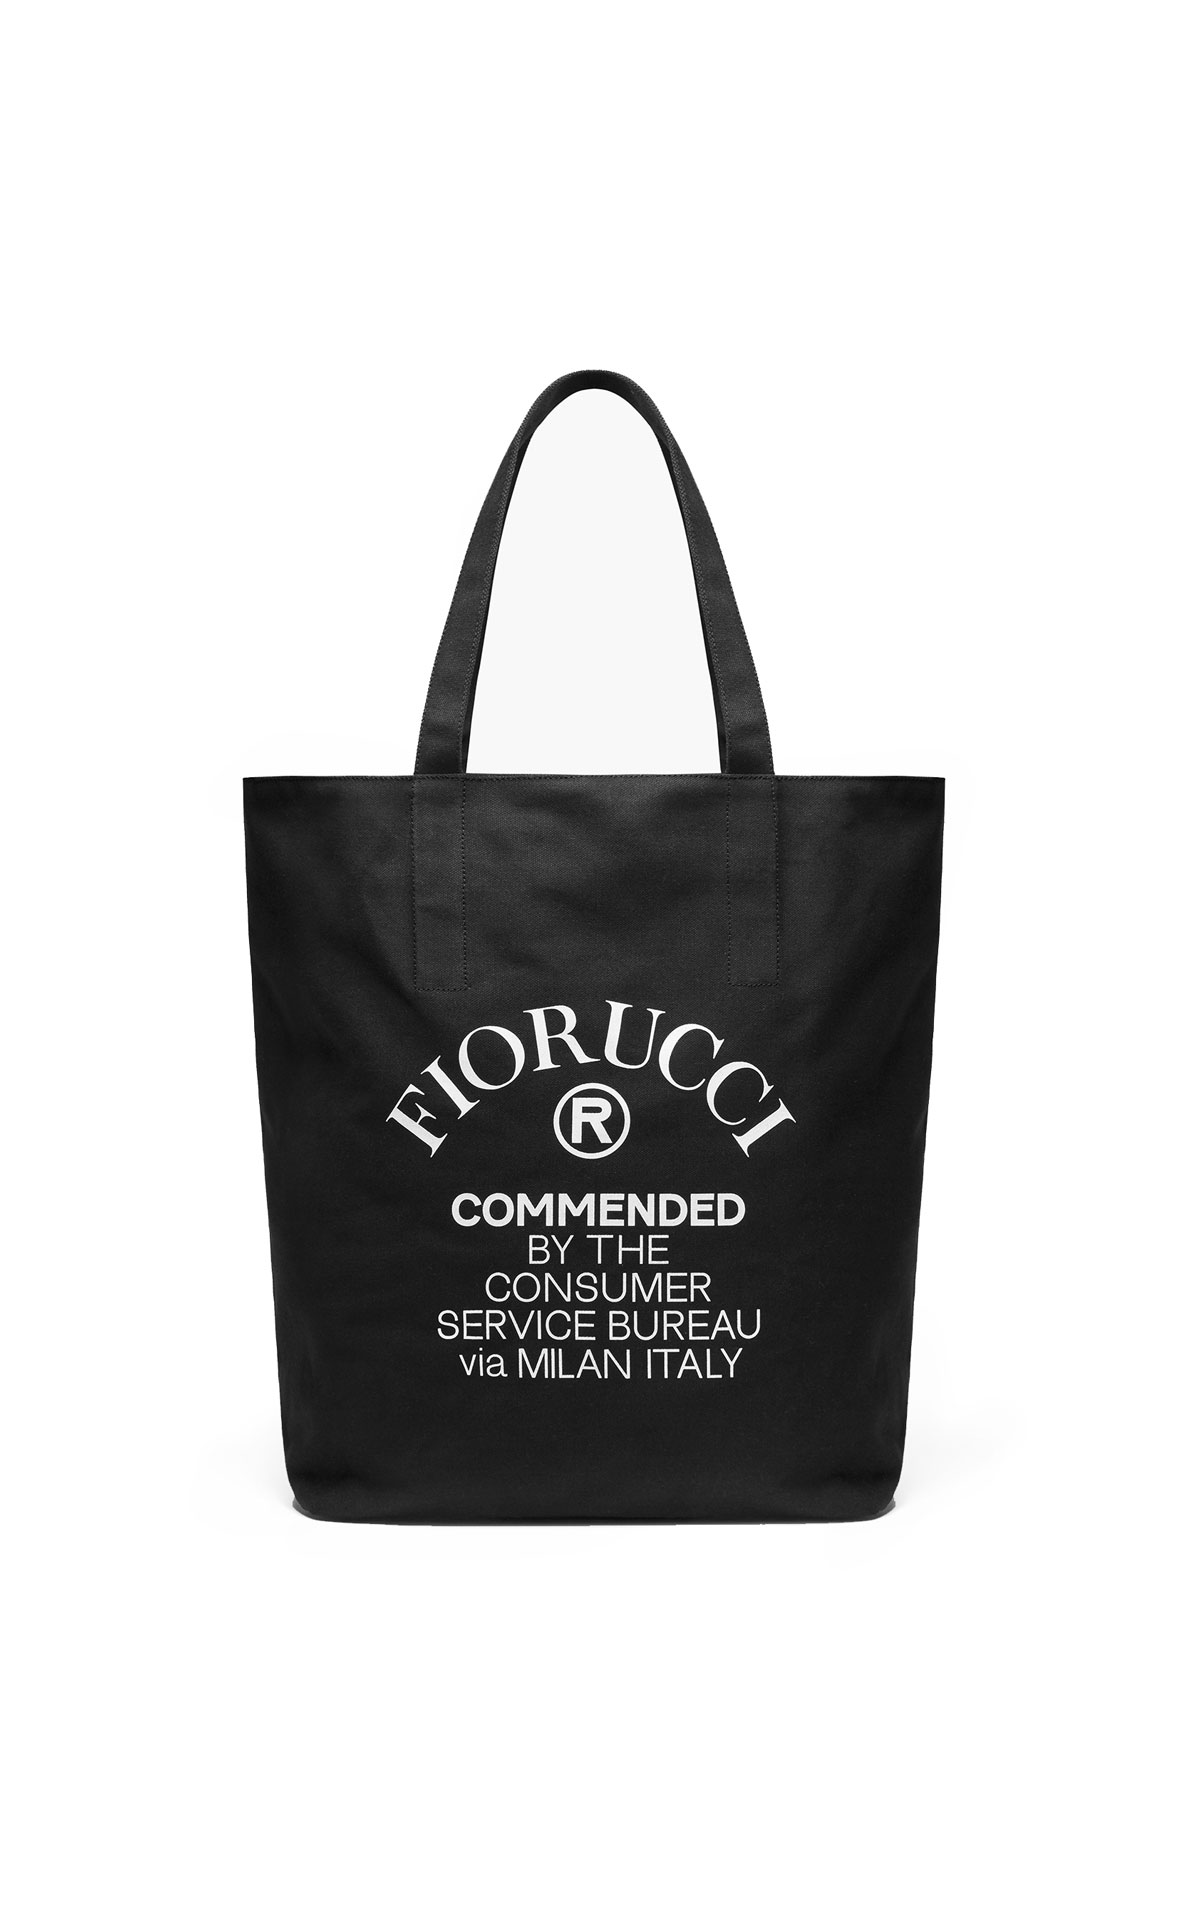 Fiorucci Commended tote bag navy from Bicester Village